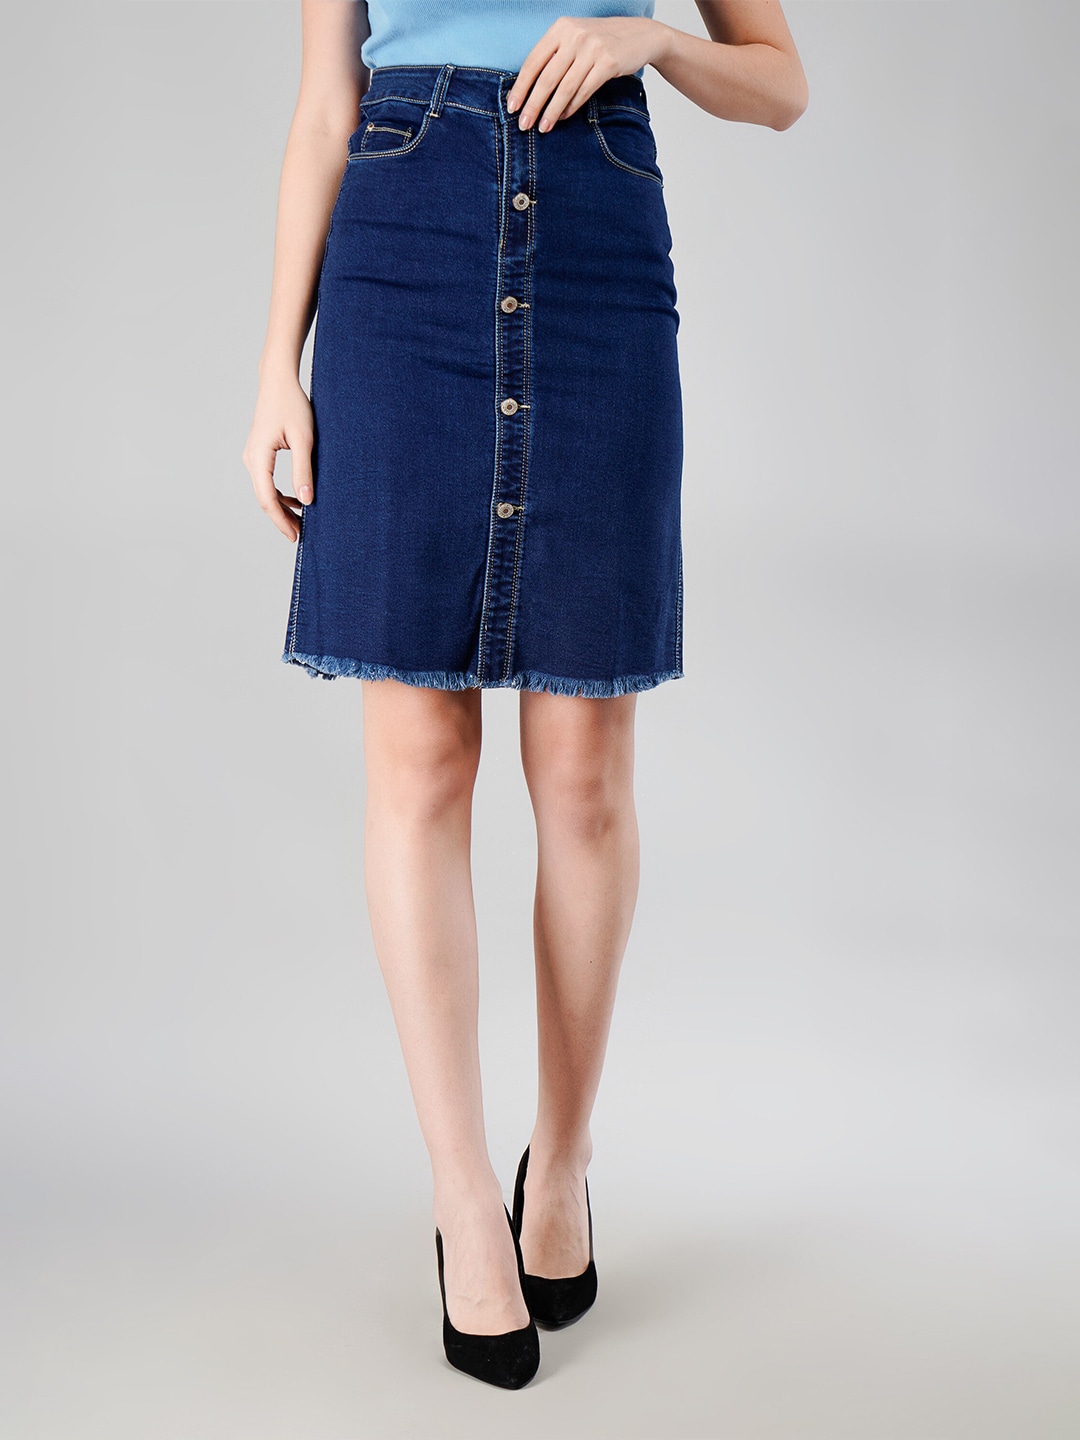 BESIMPLE Women Mid-Rise Knee-Length A-Line Denim Skirt Price in India